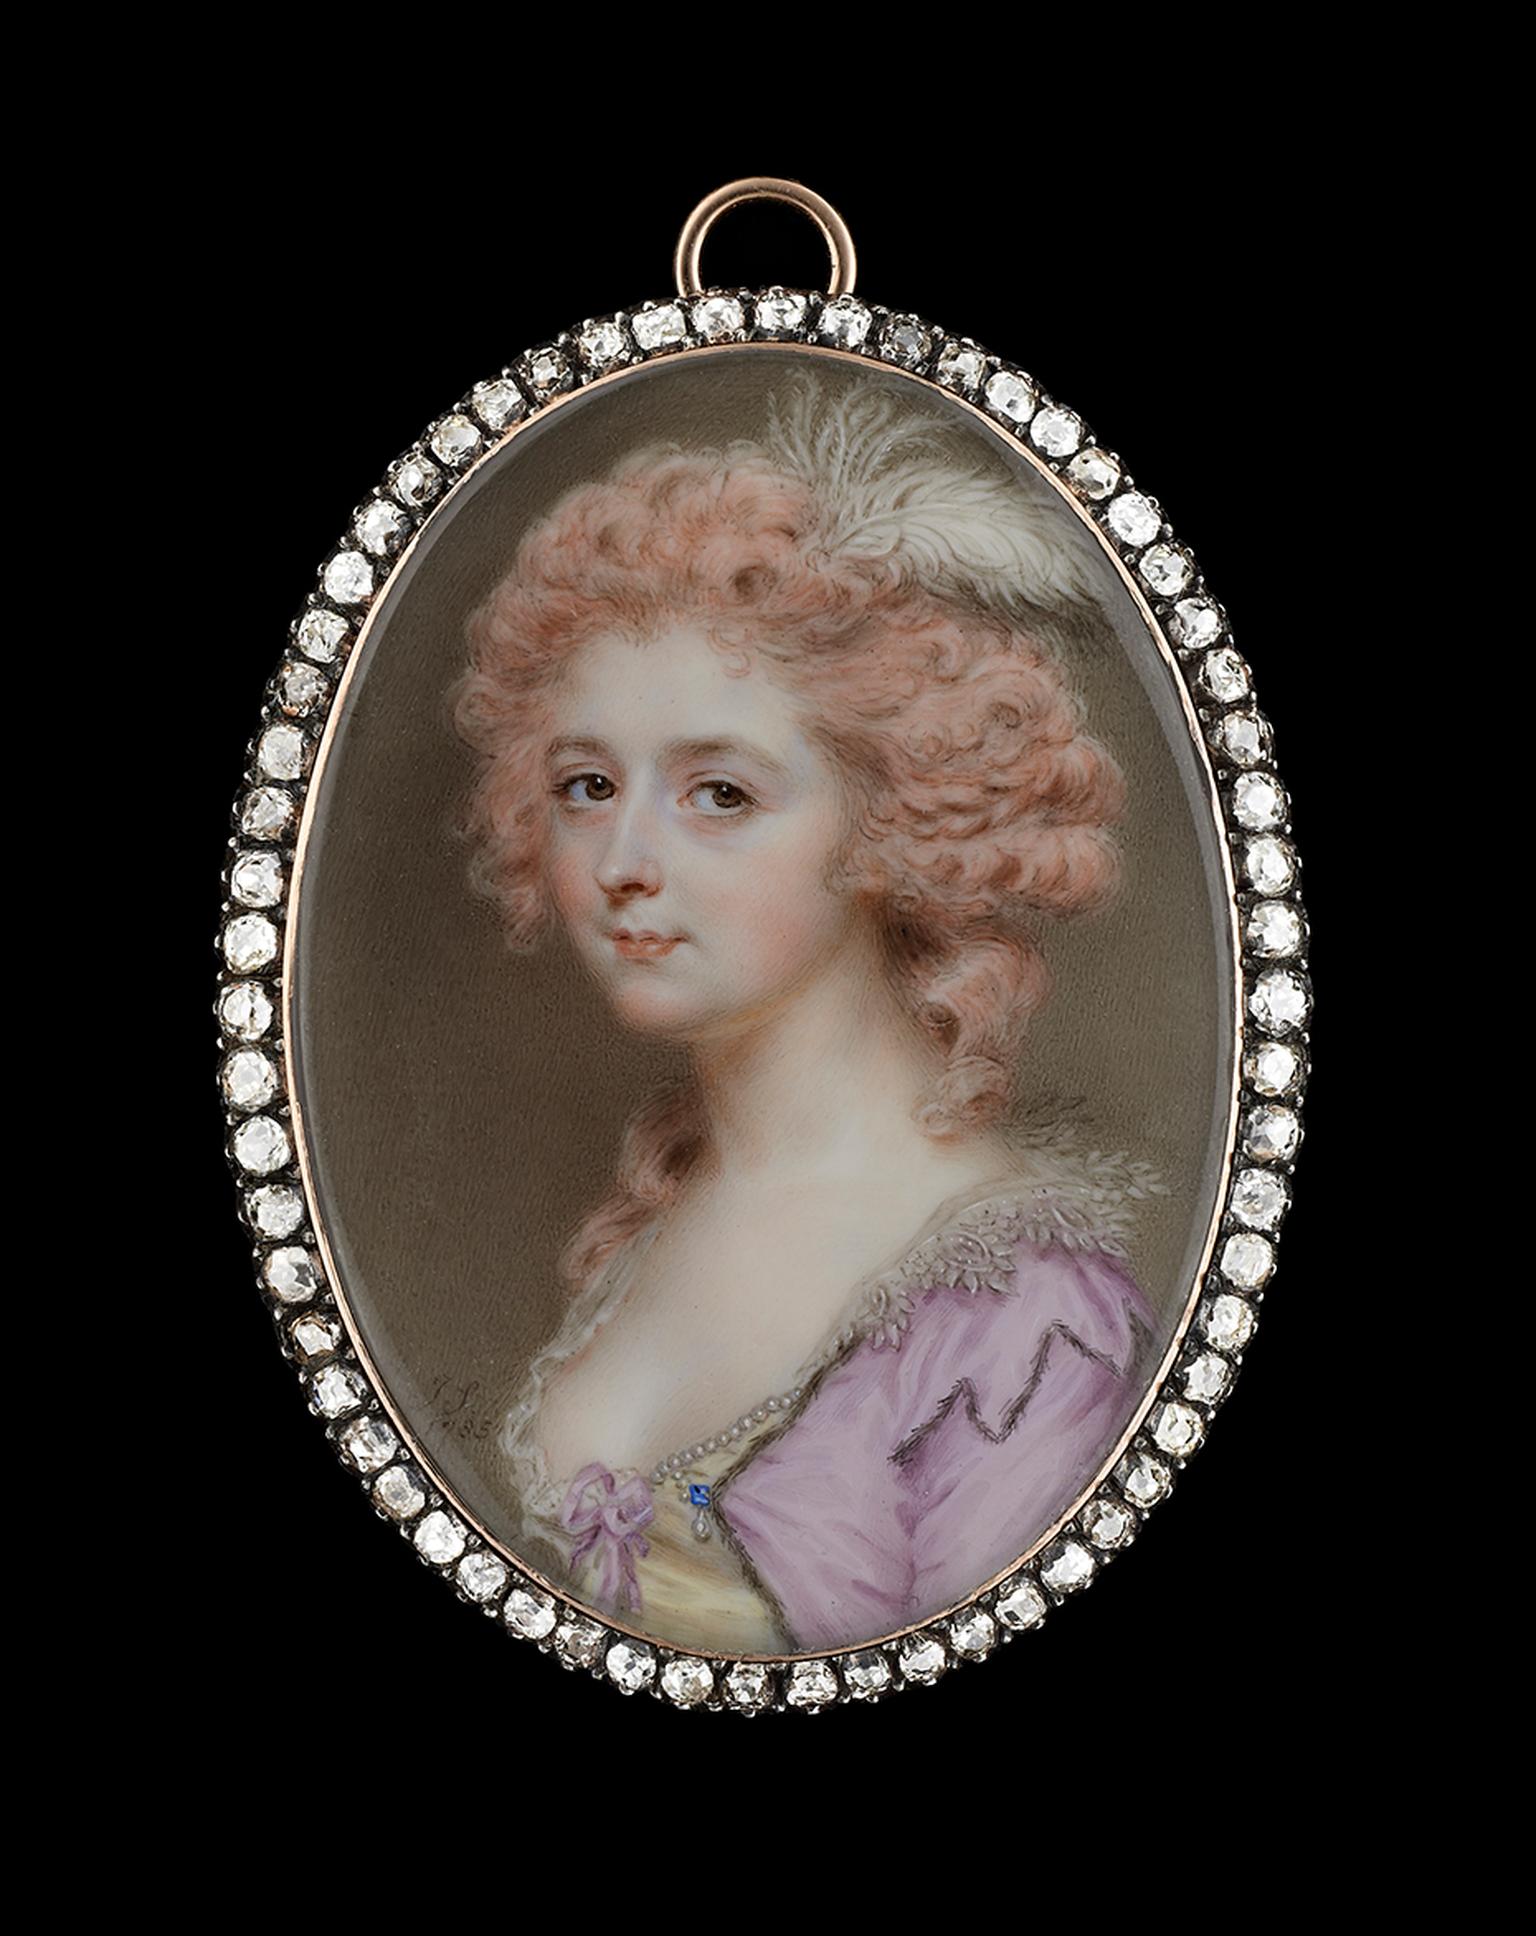 John-Smart-'A-Lady,-wearing-a-low-cut-pearl-bordered-yellow-bodice-with-mauve-bow.'-Credit--Philip-Mould-&-Company.jpg